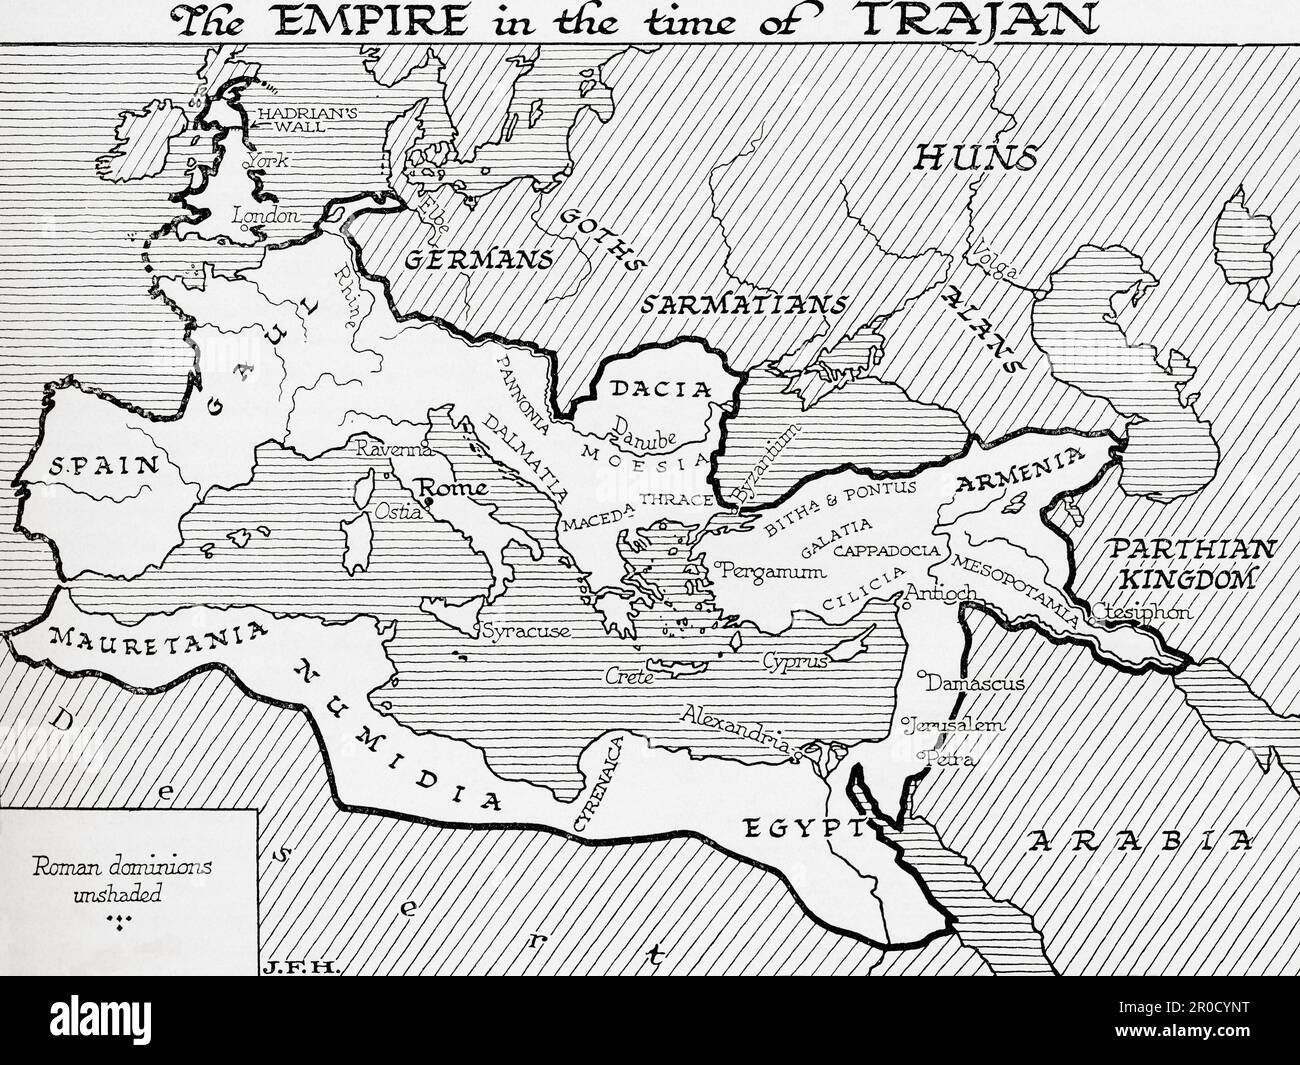 Map of the Roman Empire in the time of Trajan.  From the book Outline of History by H.G. Wells, published 1920. Stock Photo